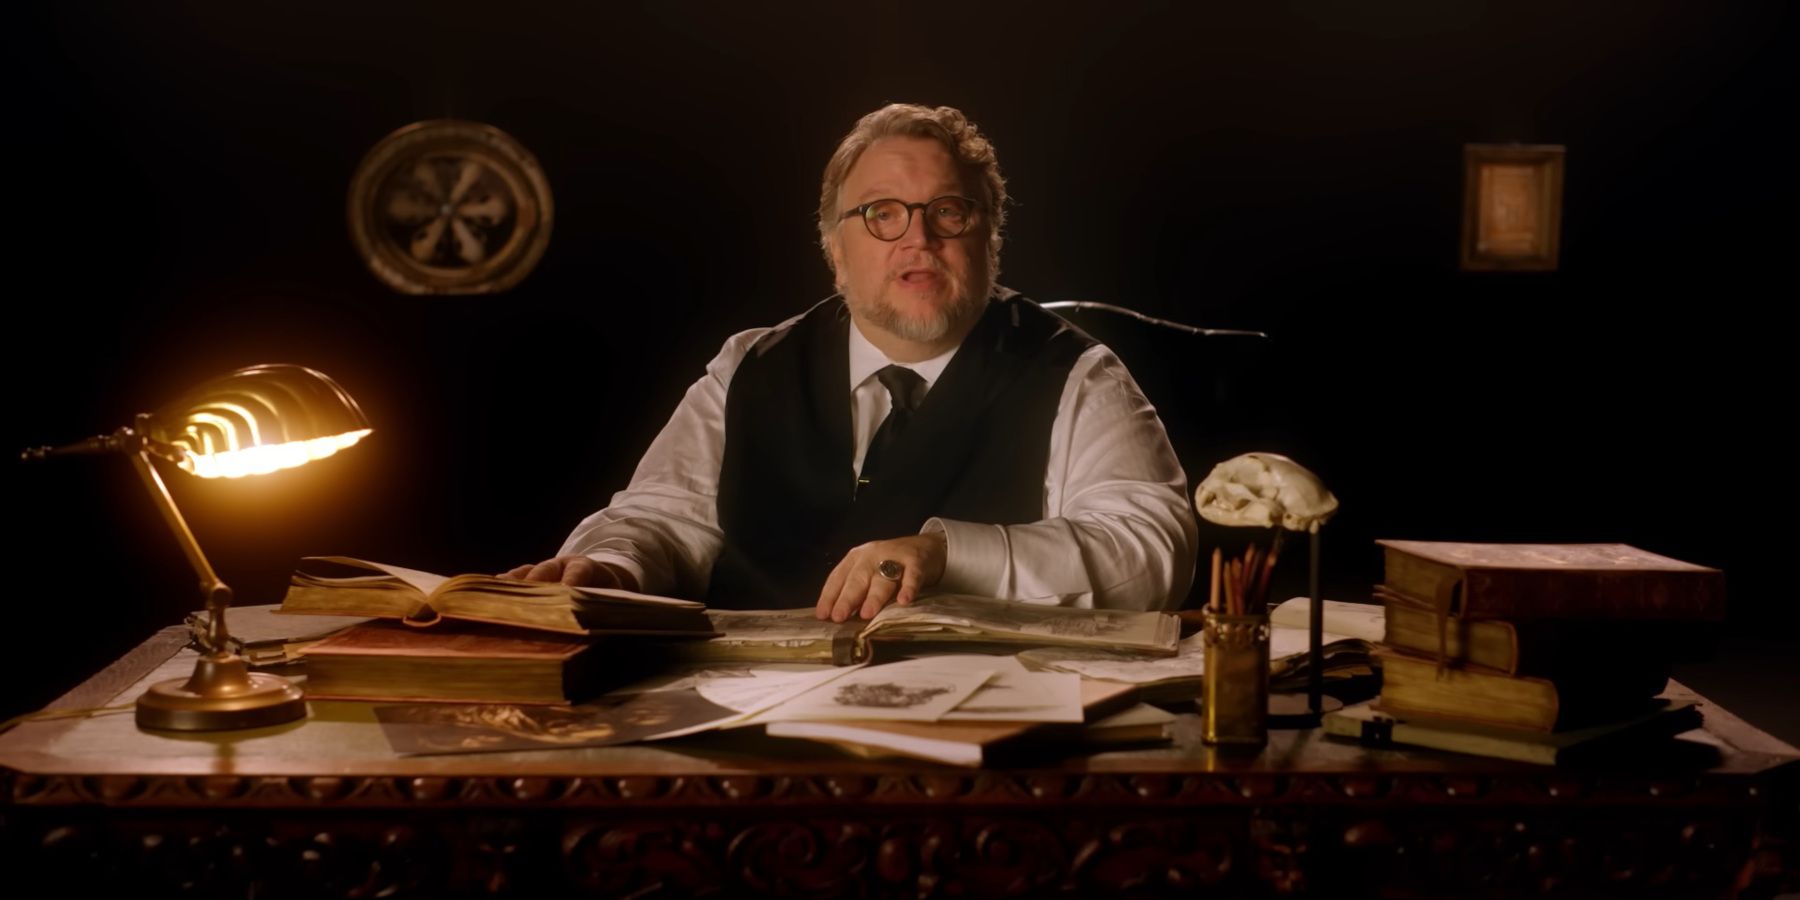 Guillermo del Toro introducing his Cabinet of Curiosities from a vintage desk